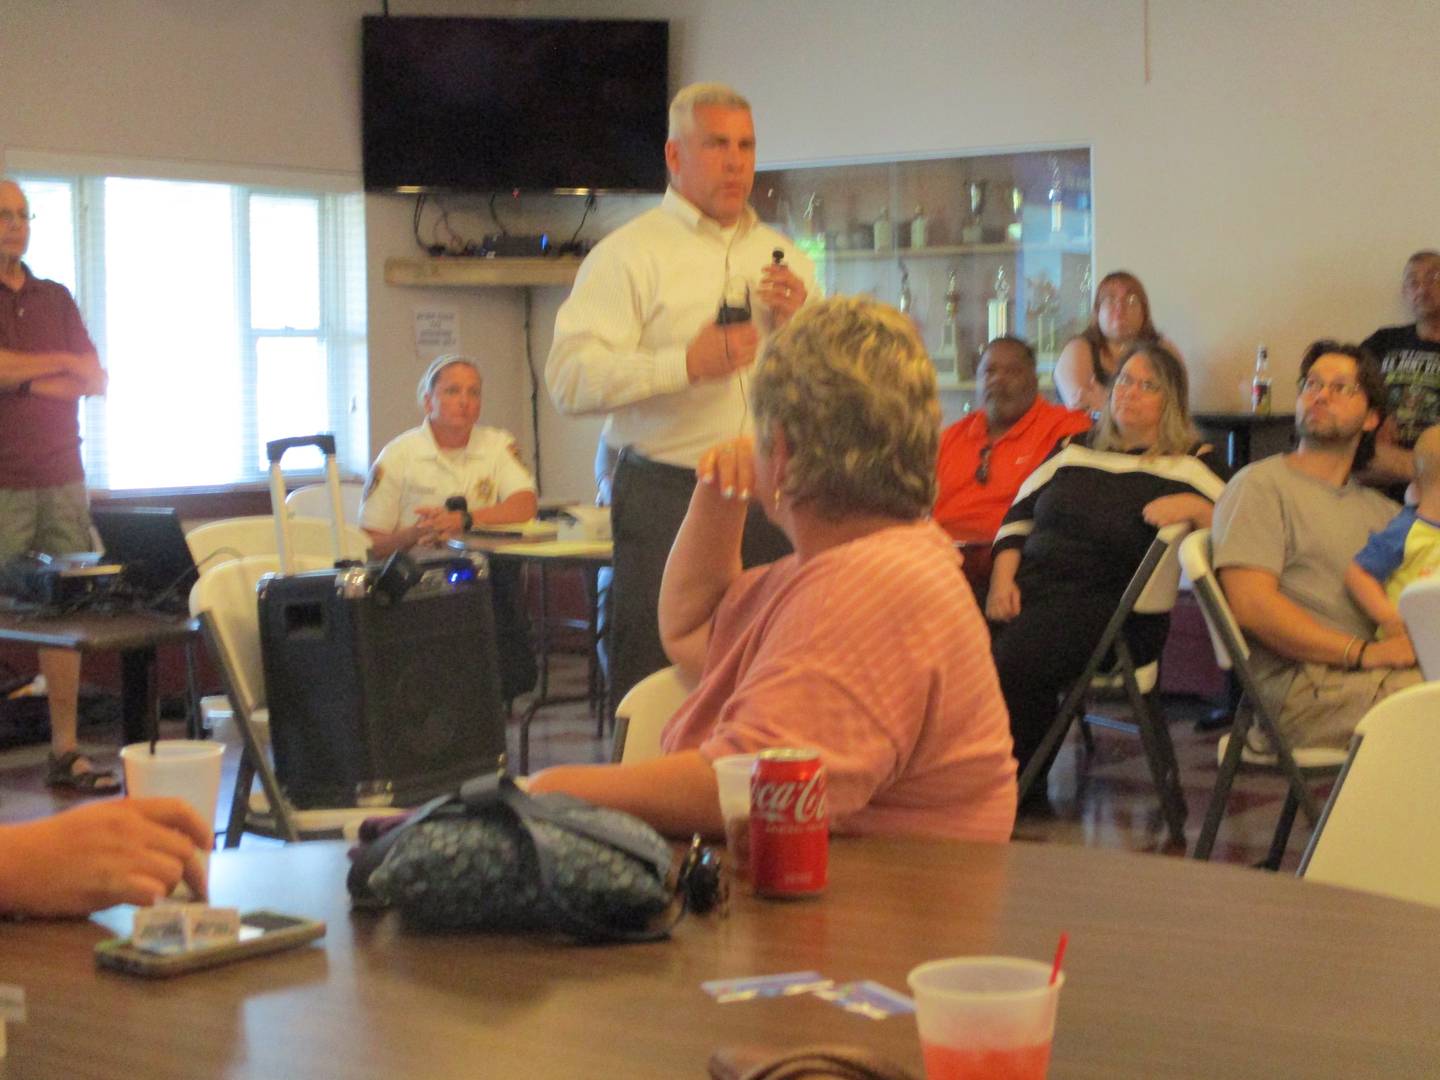 Joliet Mayor Bob O'Dekirk tells residents of the Cunningham neighborhood that the city will continue to try to close down an apartment house for registered sex offenders at a neighborhood meeting on June 1, 2022.